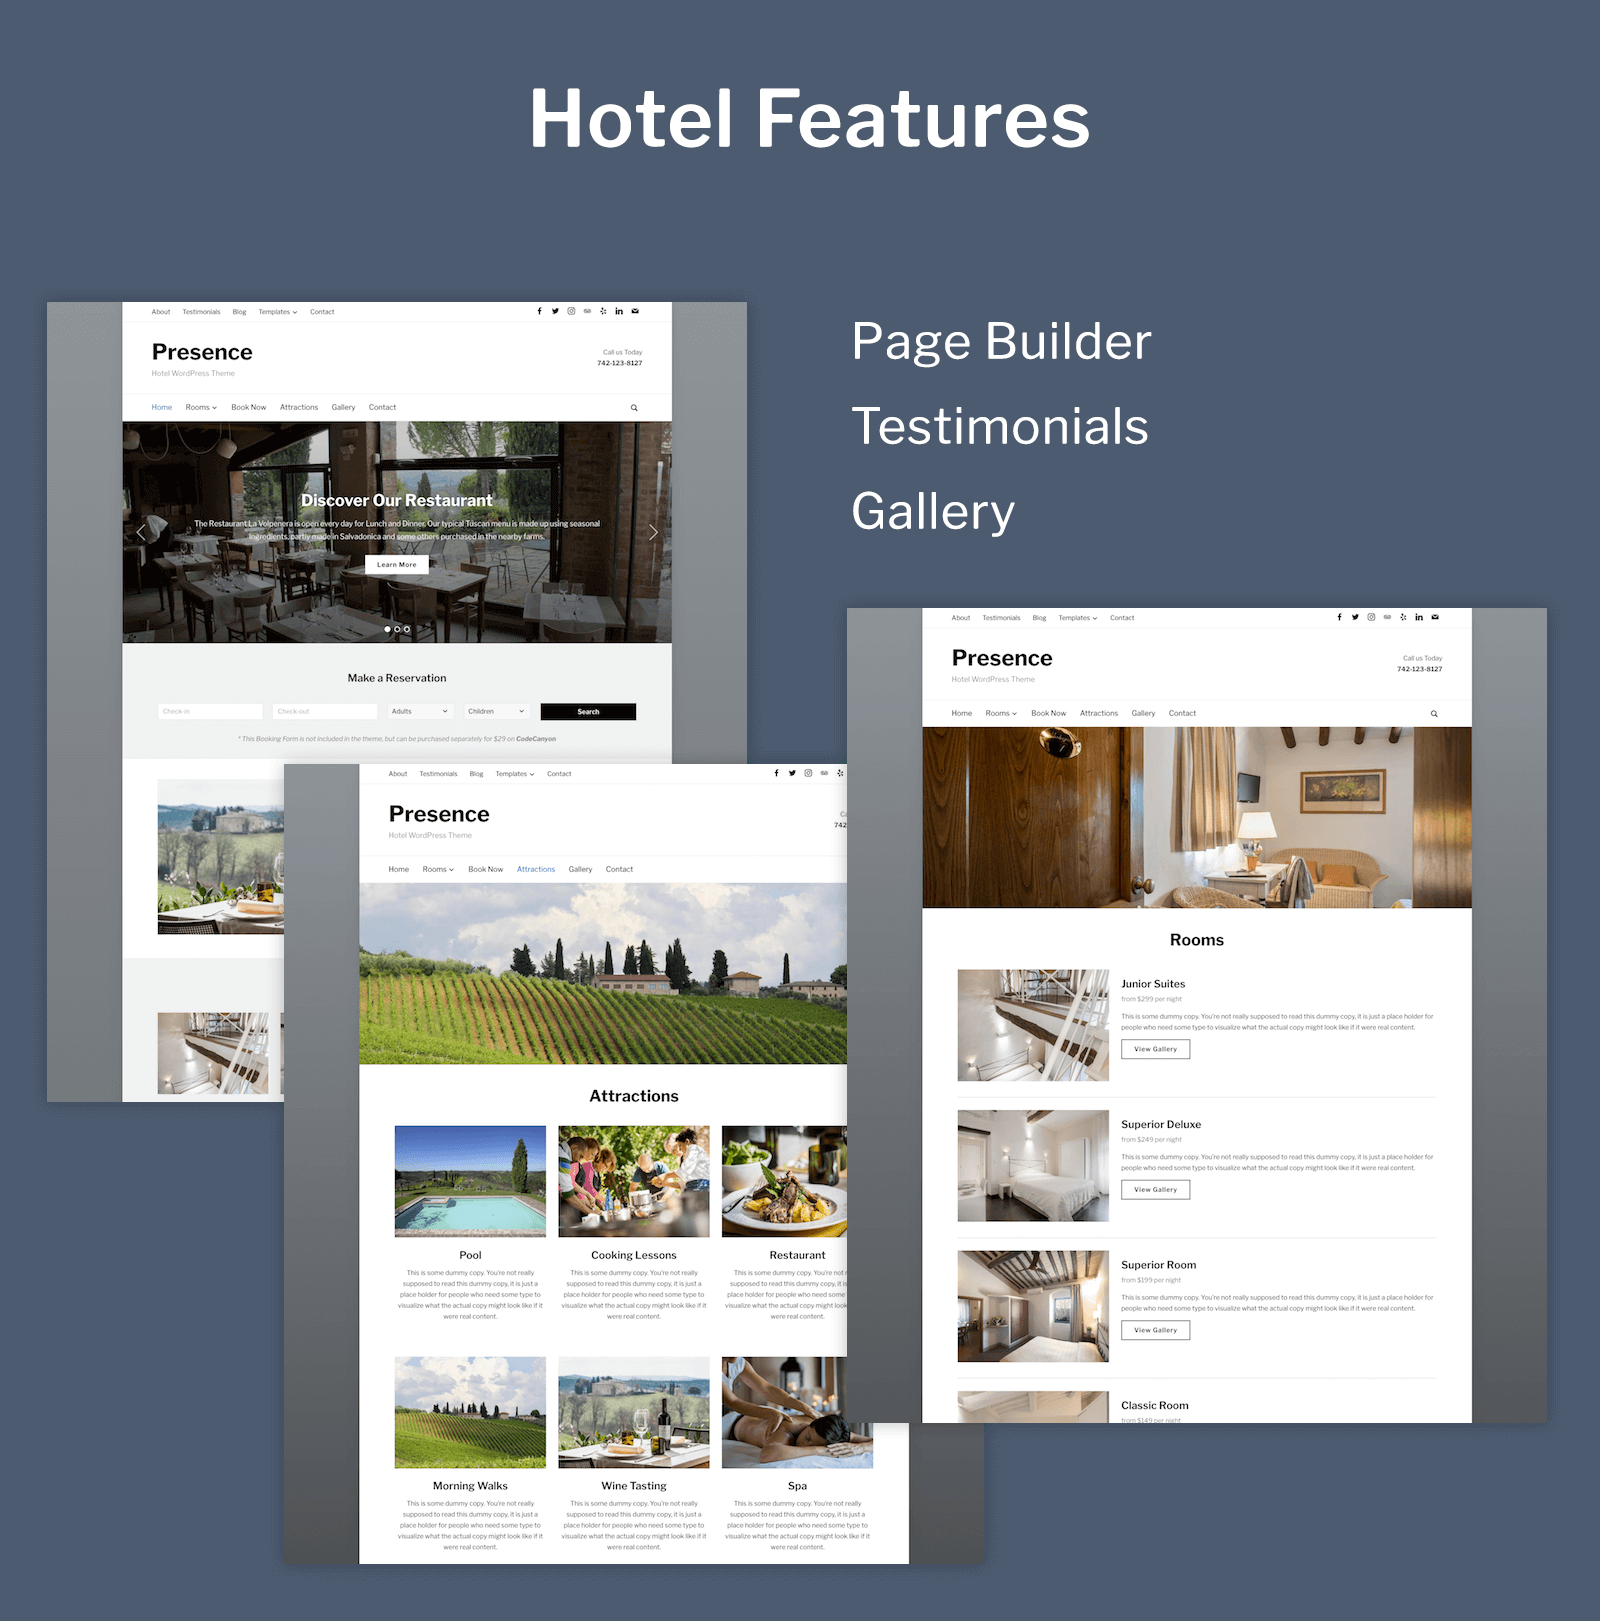 presence-hotel-features-1